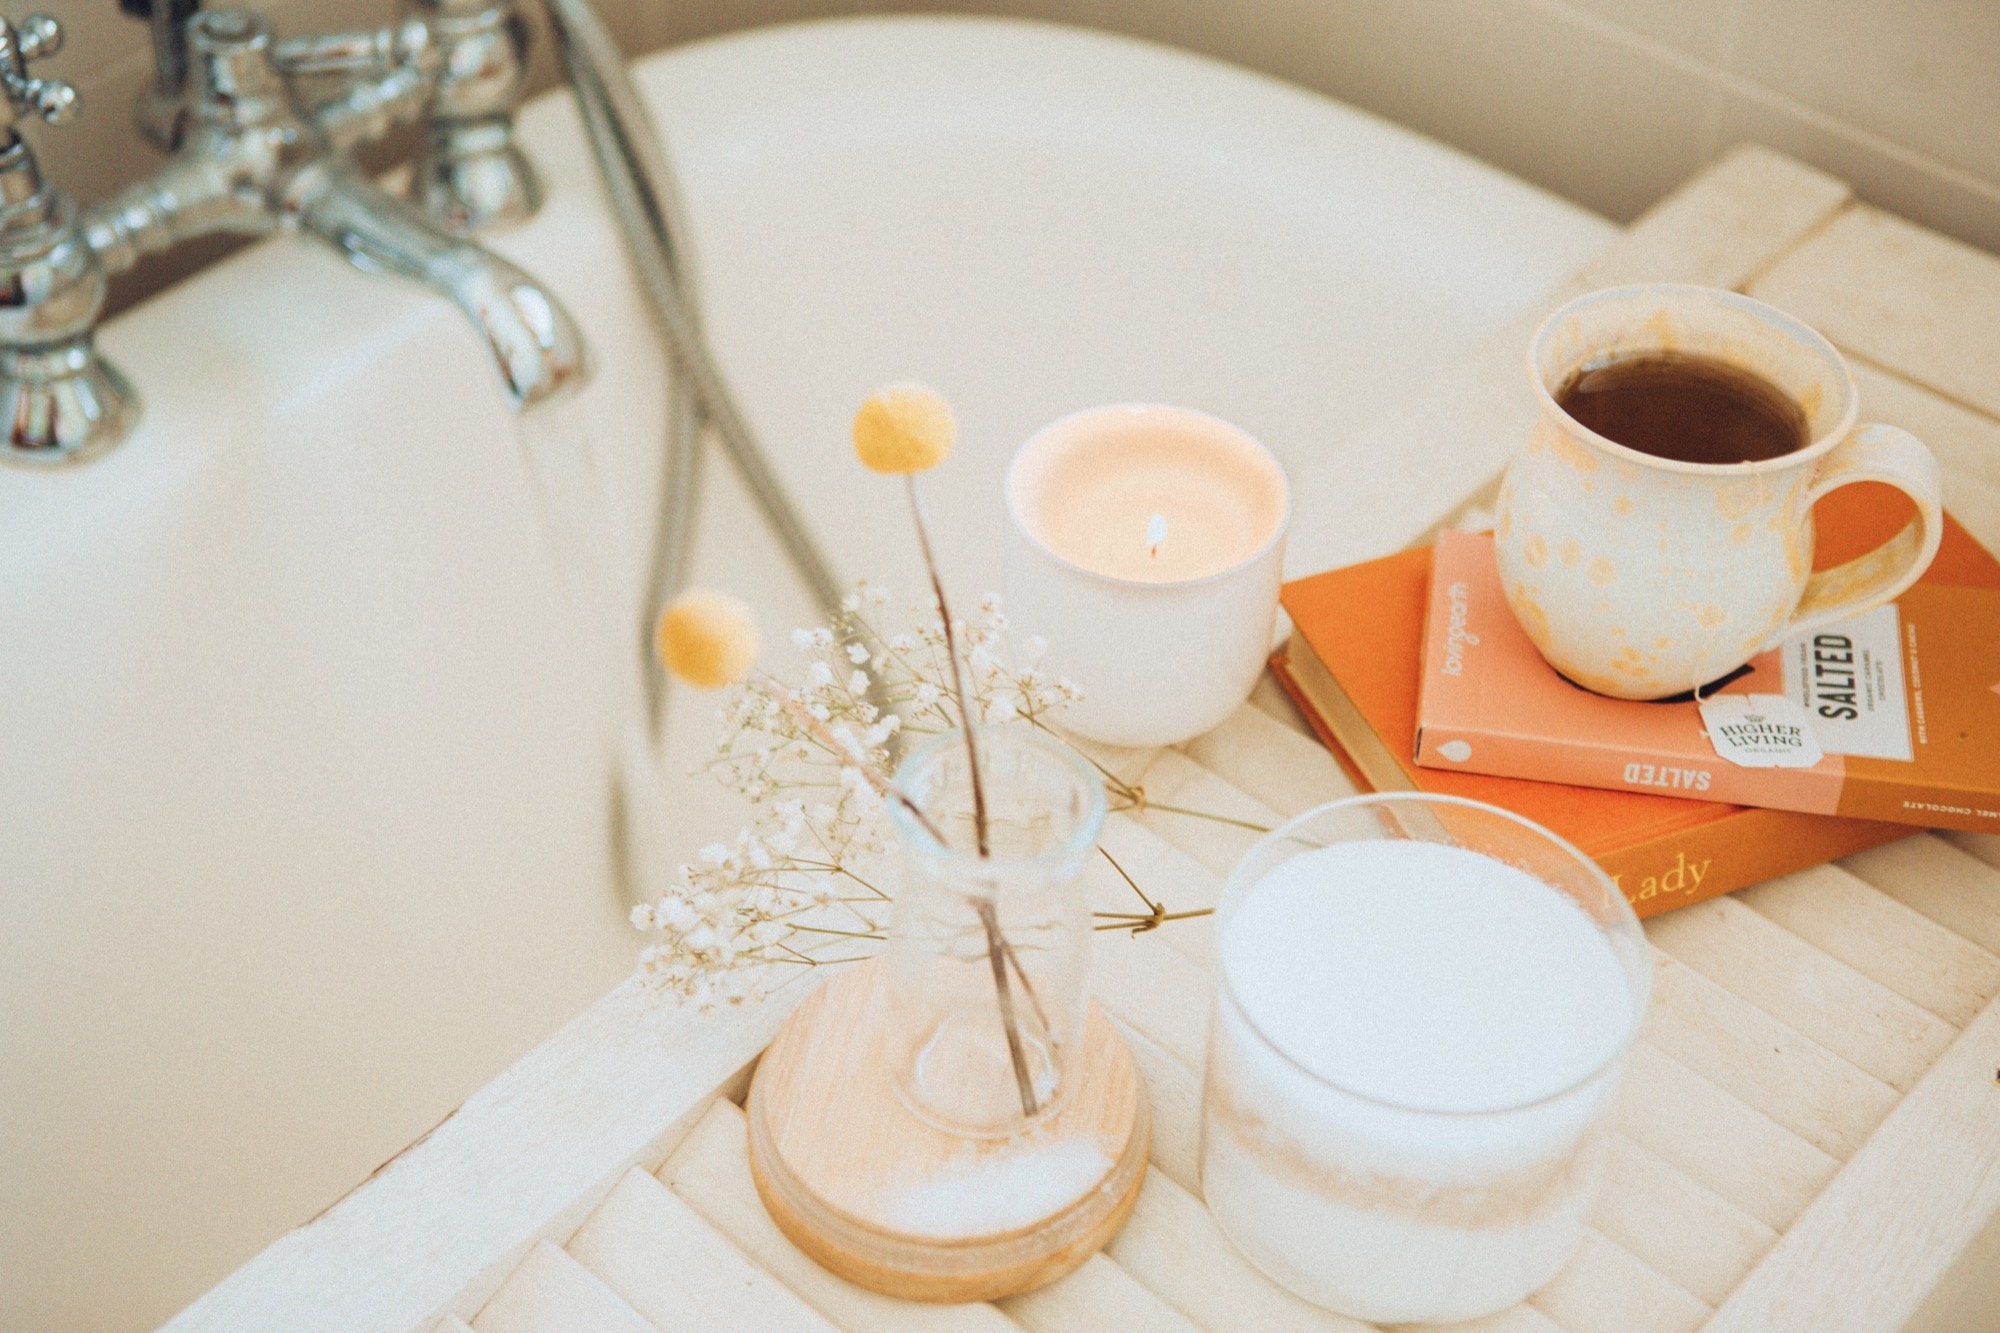 Discover the Healing Power of Water With These 4 Bath Mixes